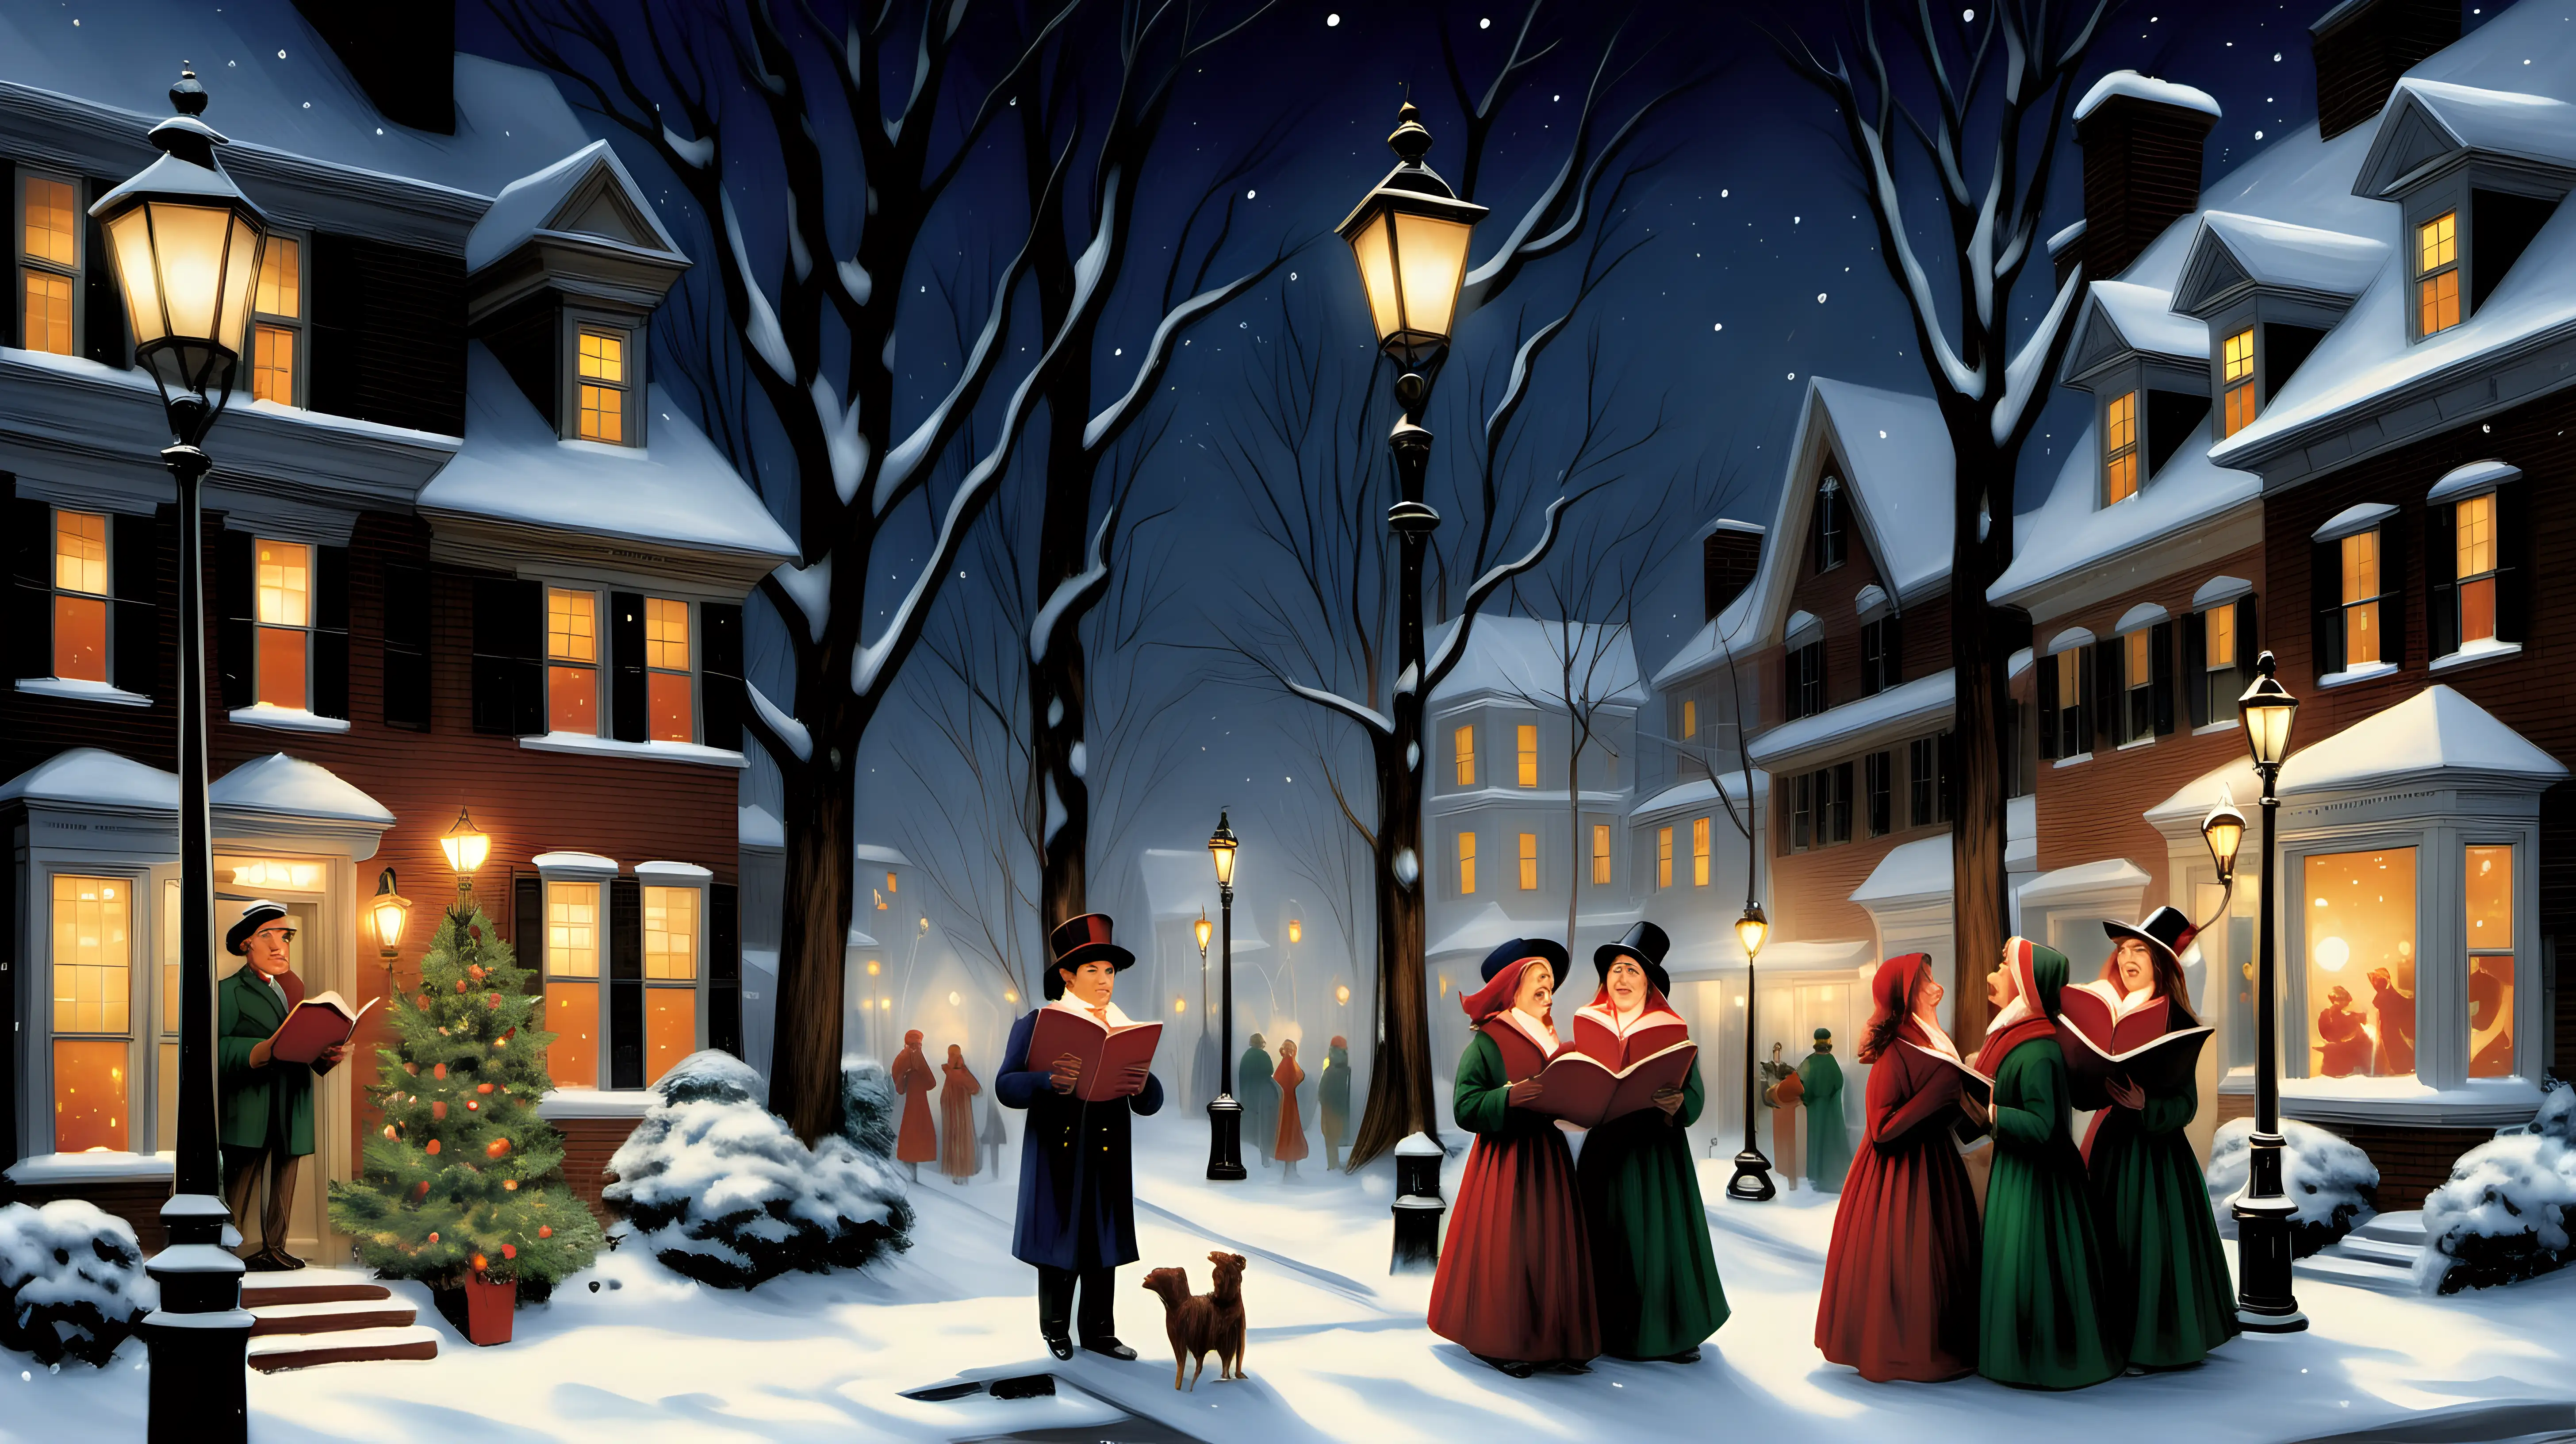 Enchanting Snowy Evening Carolers Singing by Lampposts